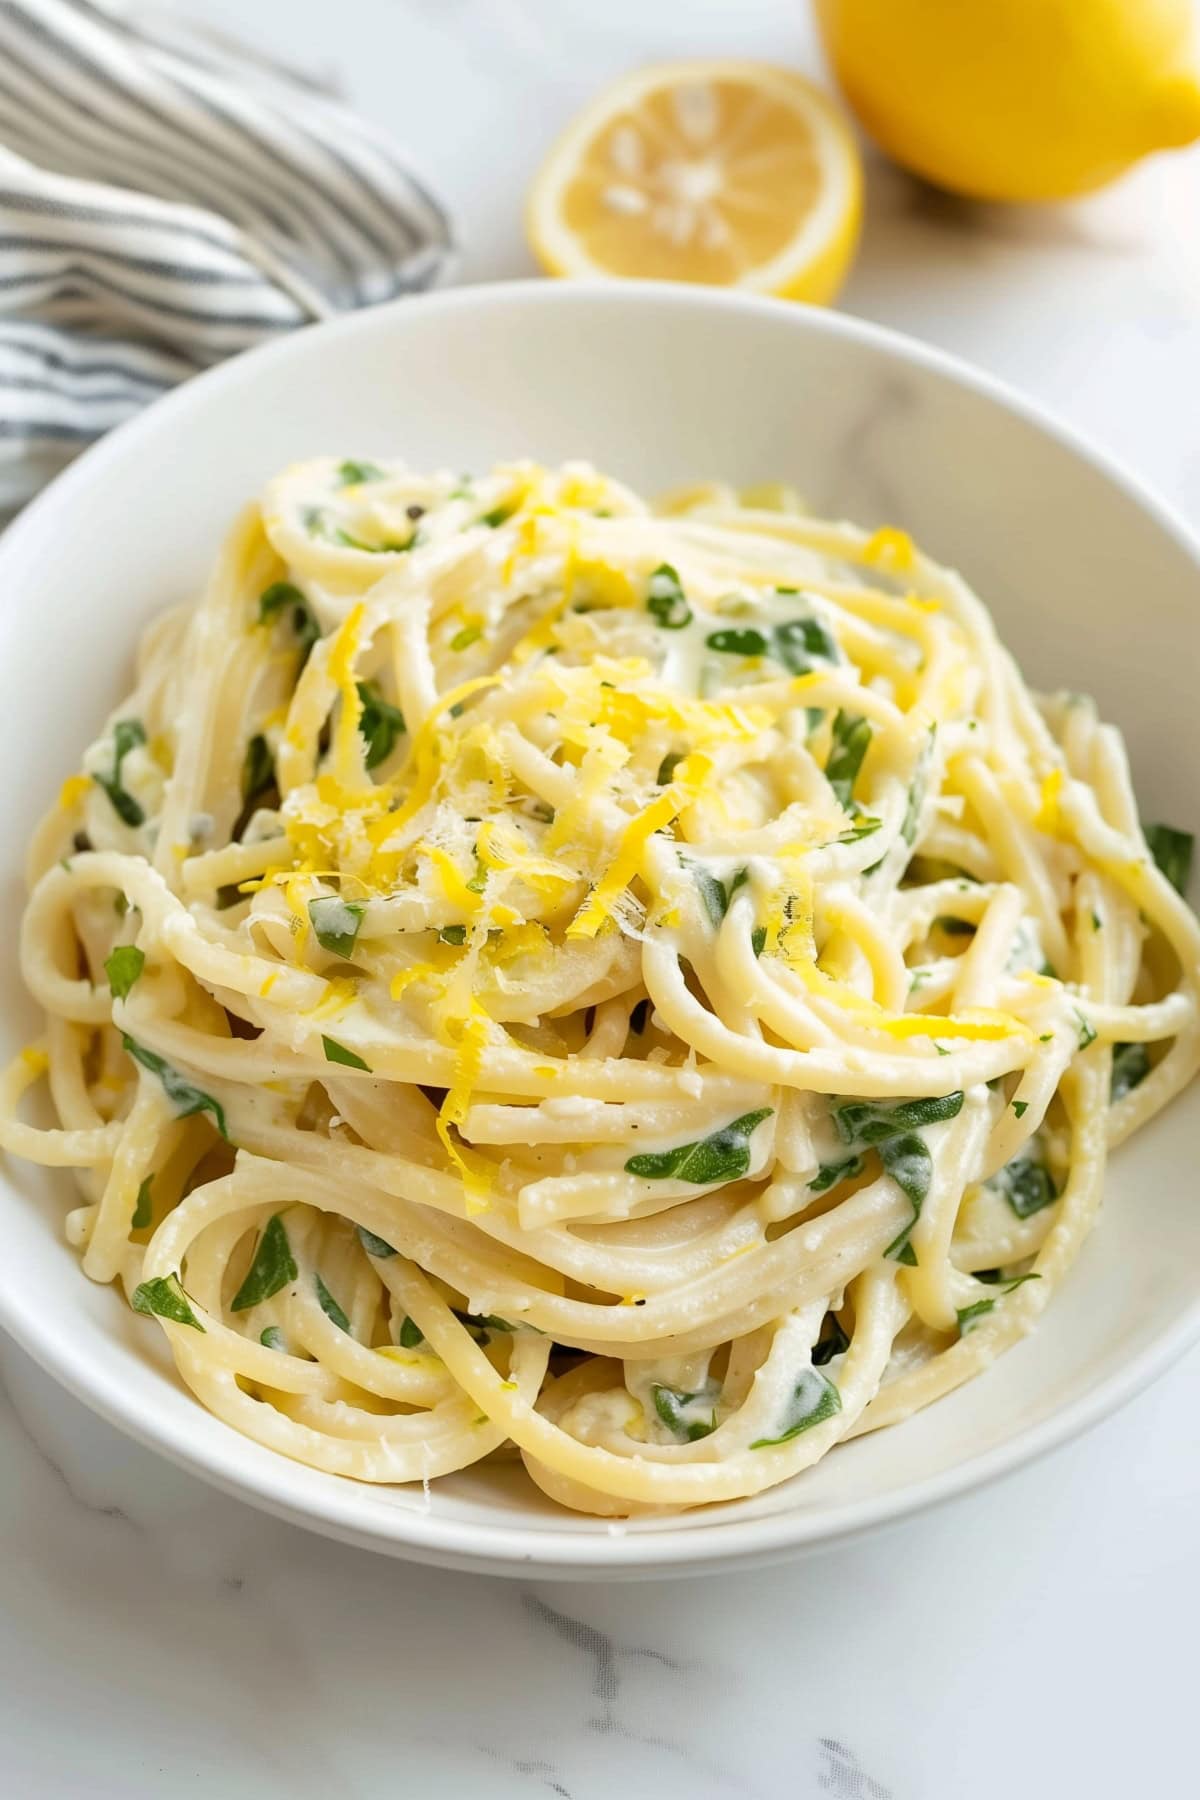 Creamy lemon ricotta pasta, featuring zesty lemon zest and baby spinach in a white bowl.